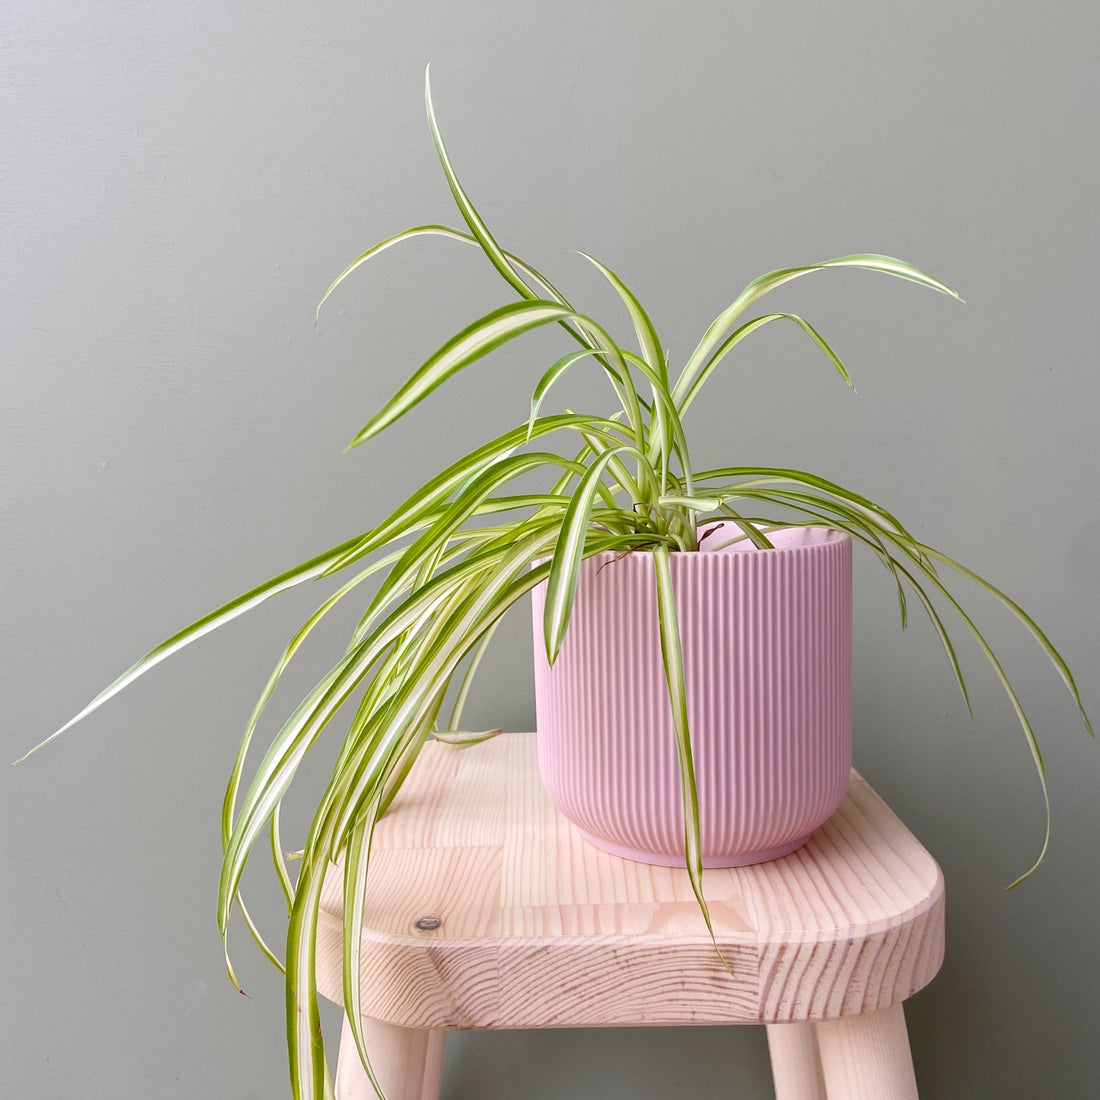 What to do when you get a houseplant *NOT* from us